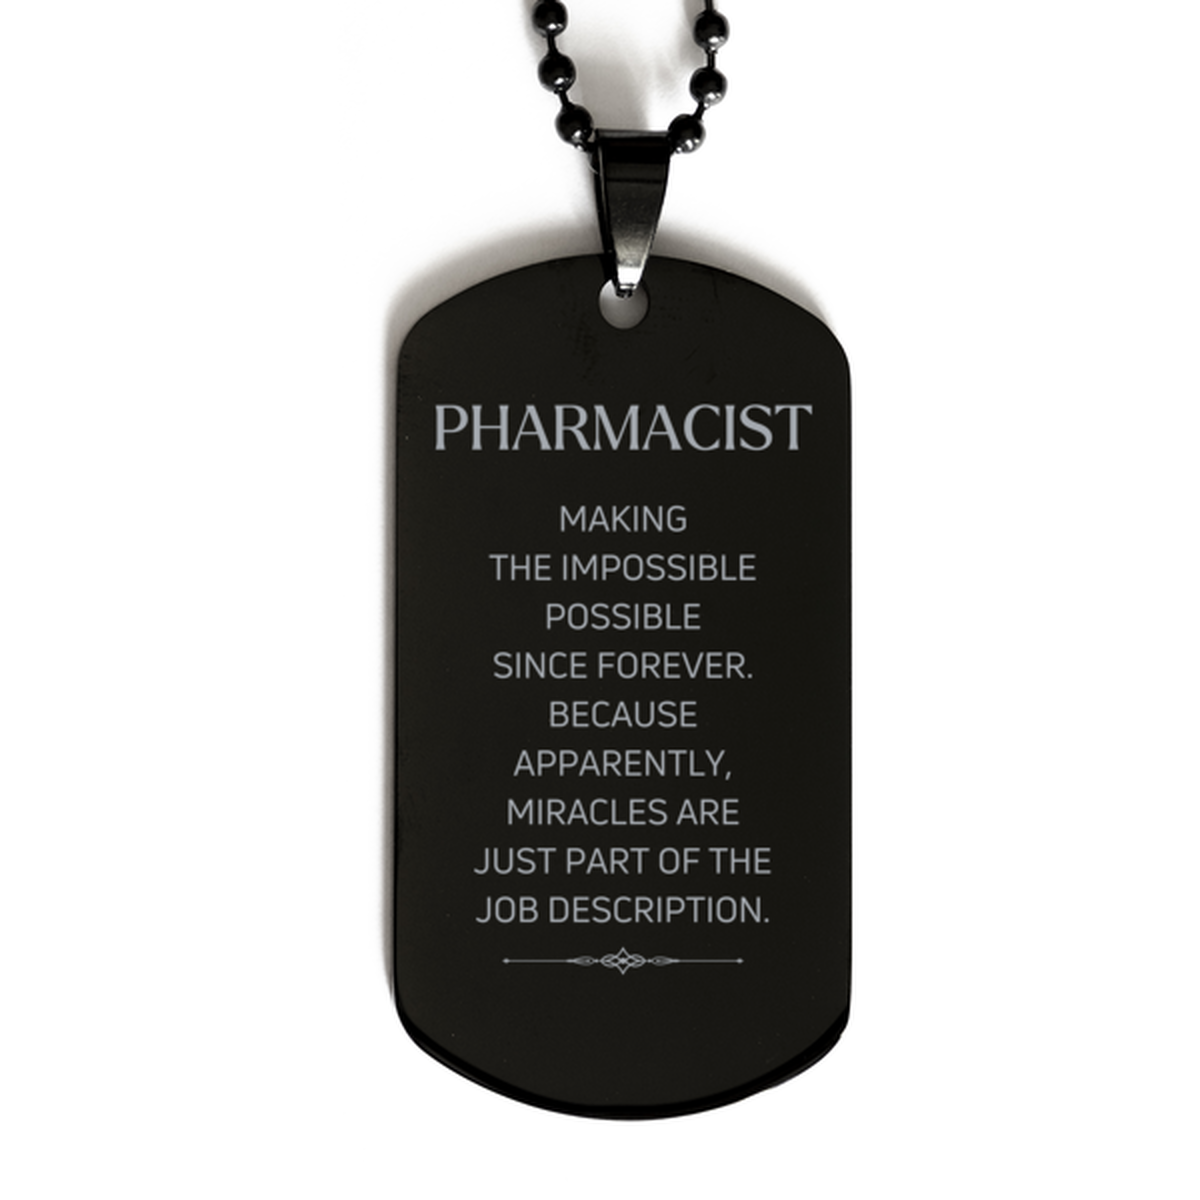 Funny Pharmacist Gifts, Miracles are just part of the job description, Inspirational Birthday Black Dog Tag For Pharmacist, Men, Women, Coworkers, Friends, Boss